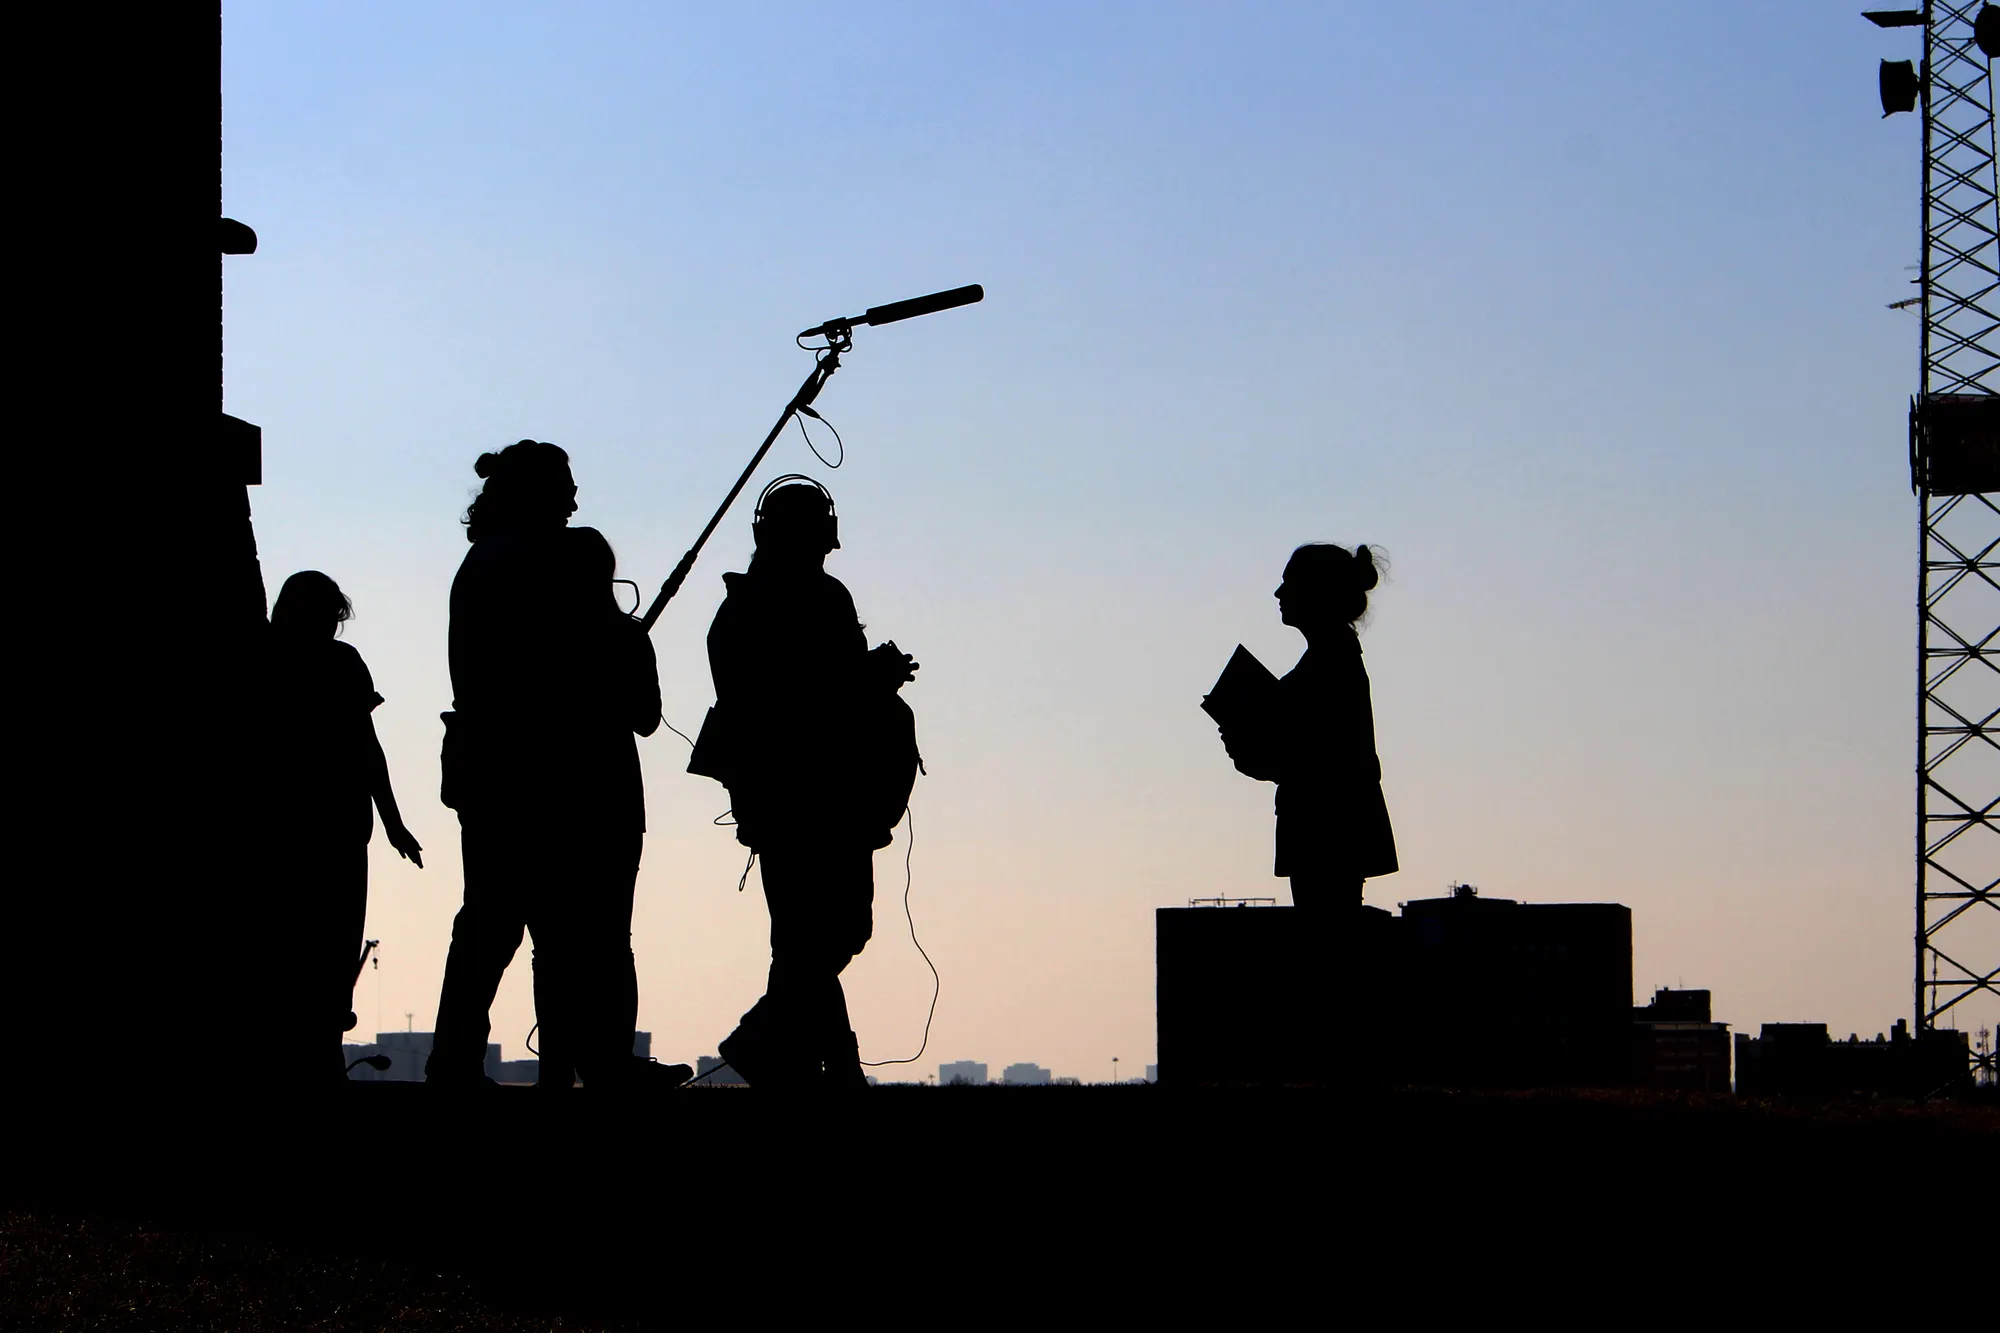 Image of a film crew silhouette.